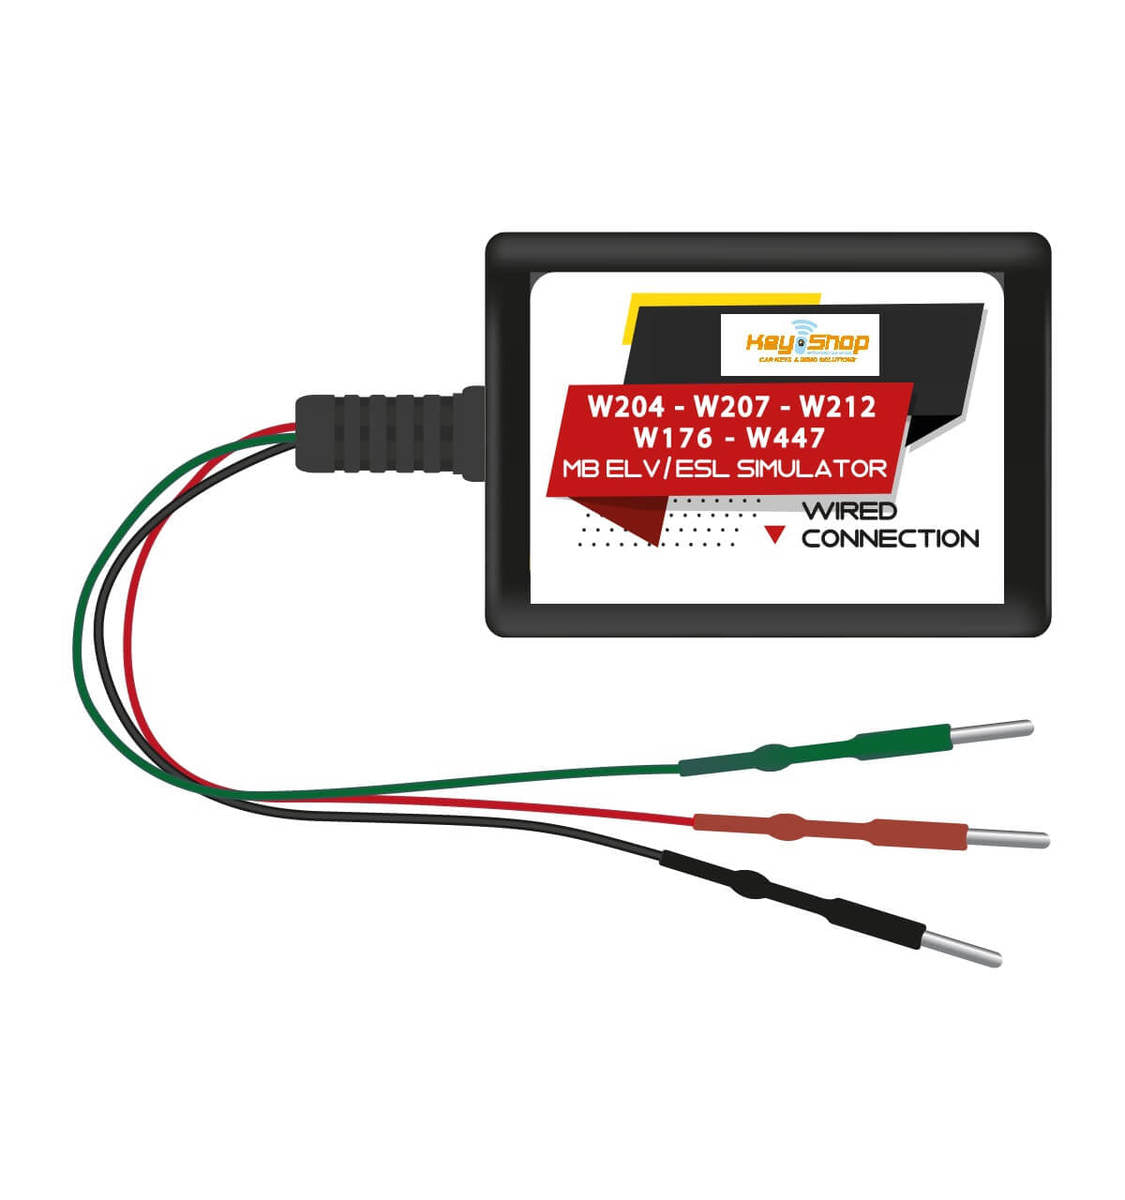 MB Universal Emulator Steering Lock Emulator wired connection for  W204-W207-W212-W176-W447 / For Abrites AVDI – Xhorse VVDI MB – CGDI MB –  DIAGSPEED –